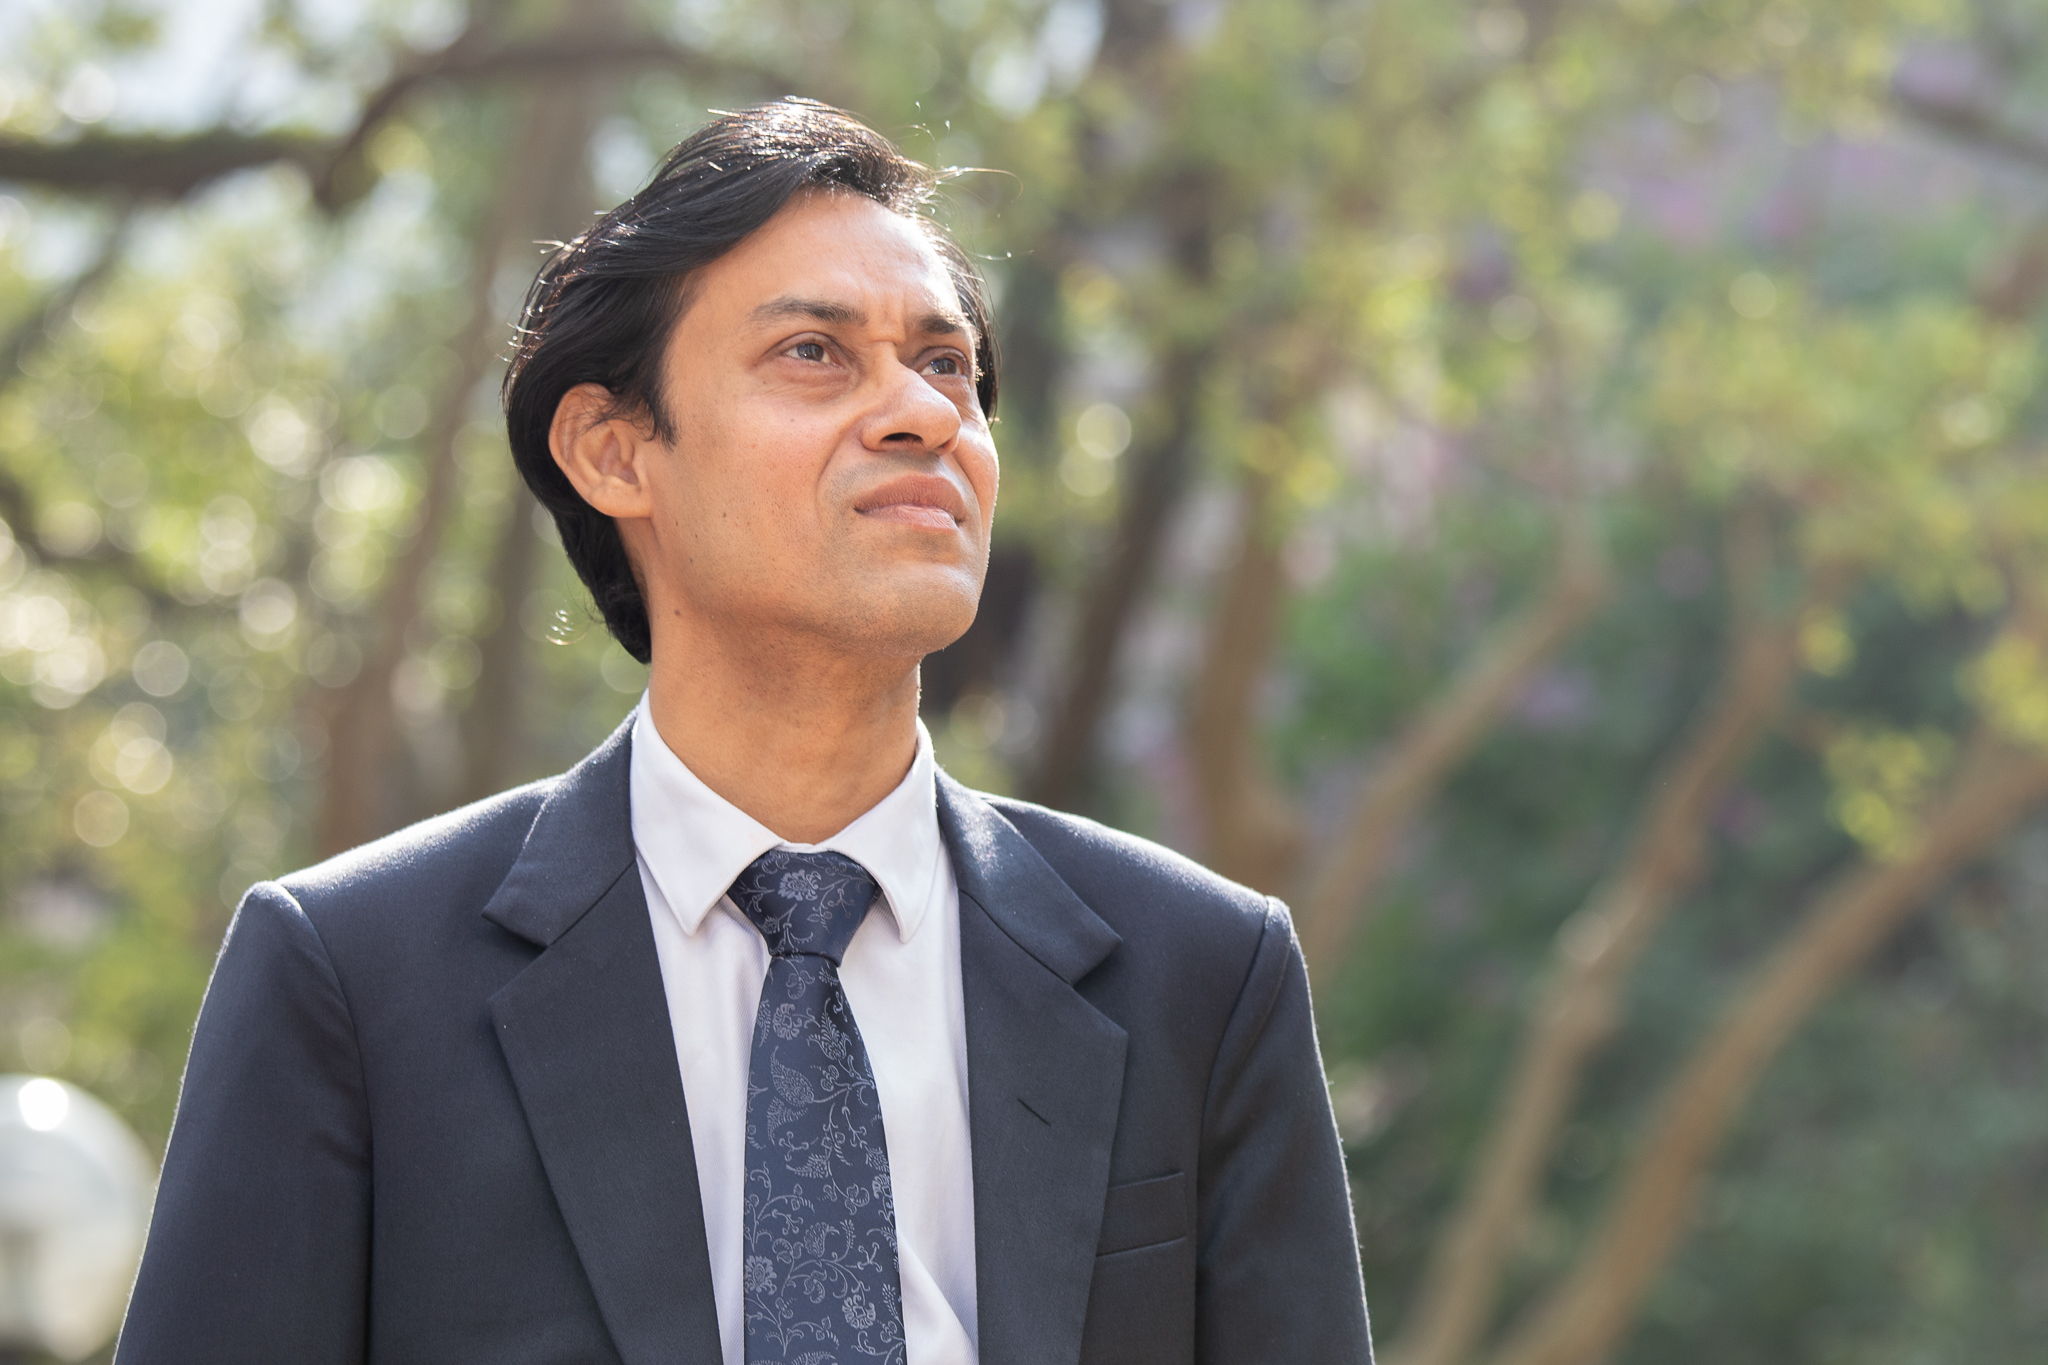 Dr Chinmoy Sarkar, Assistant Professor from HKU